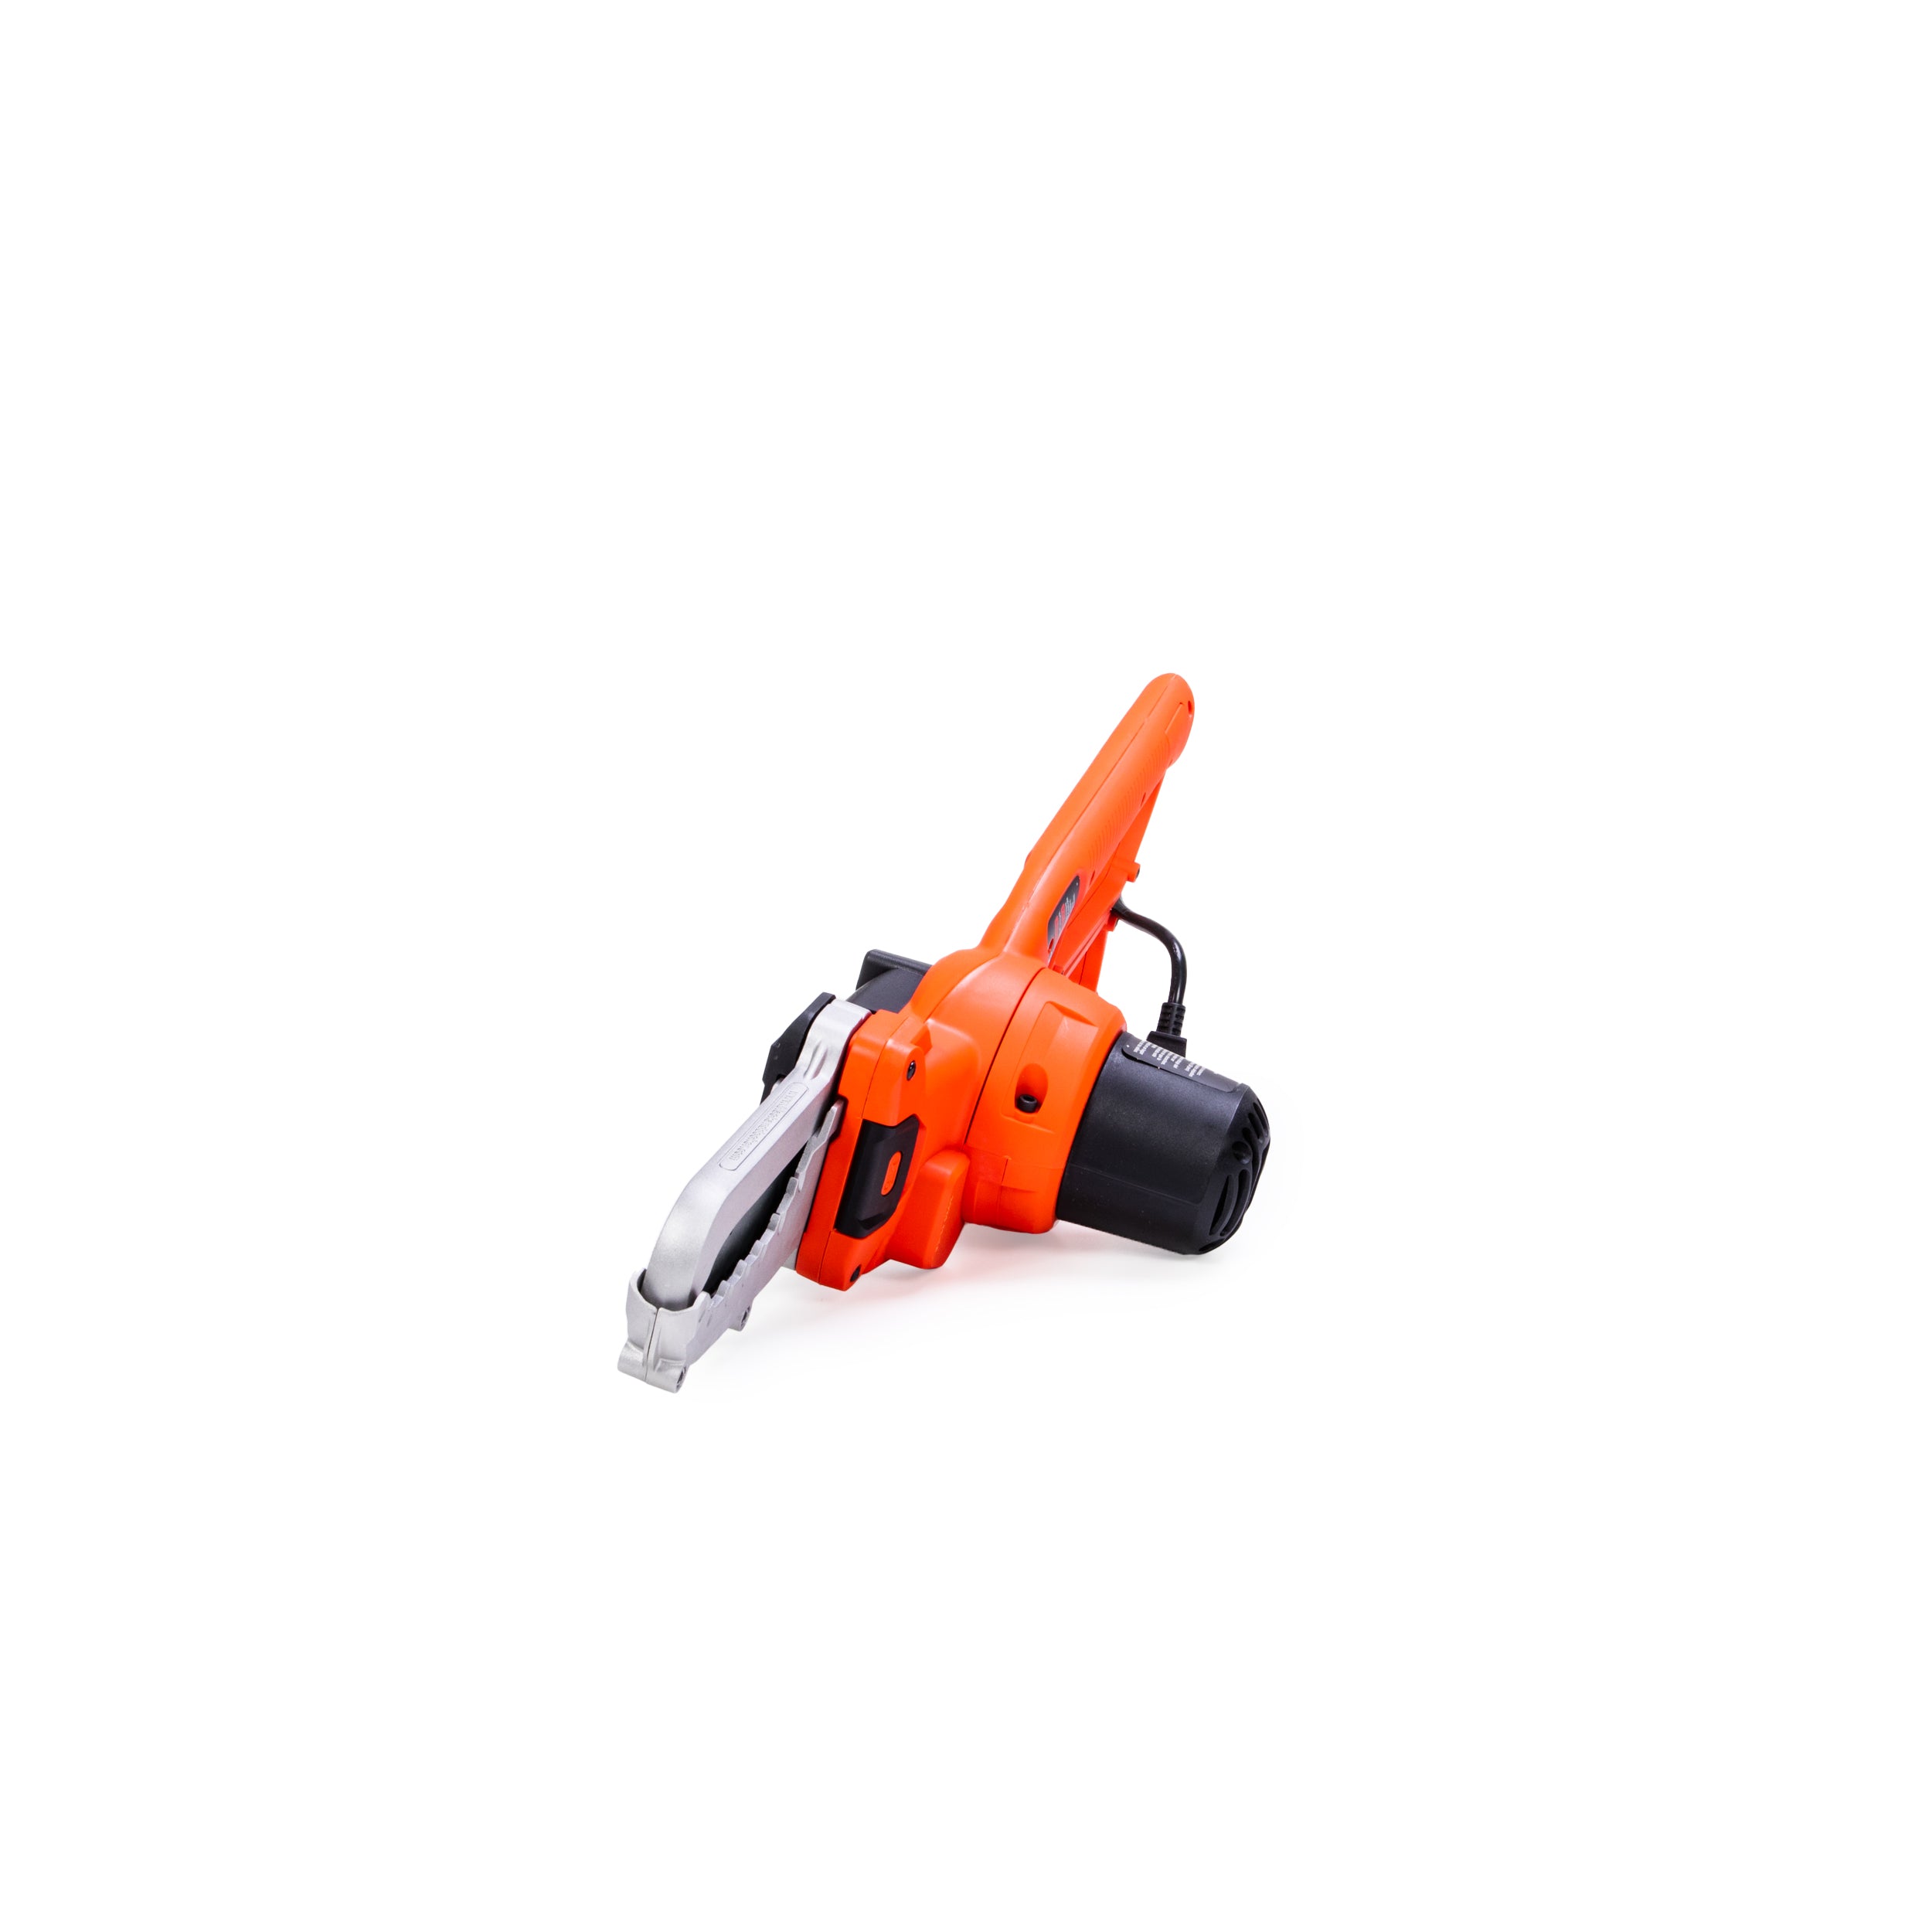 Black & Decker Black and Decker LP1000 9.375 in. Electric Alligator Lopper  at Tractor Supply Co.